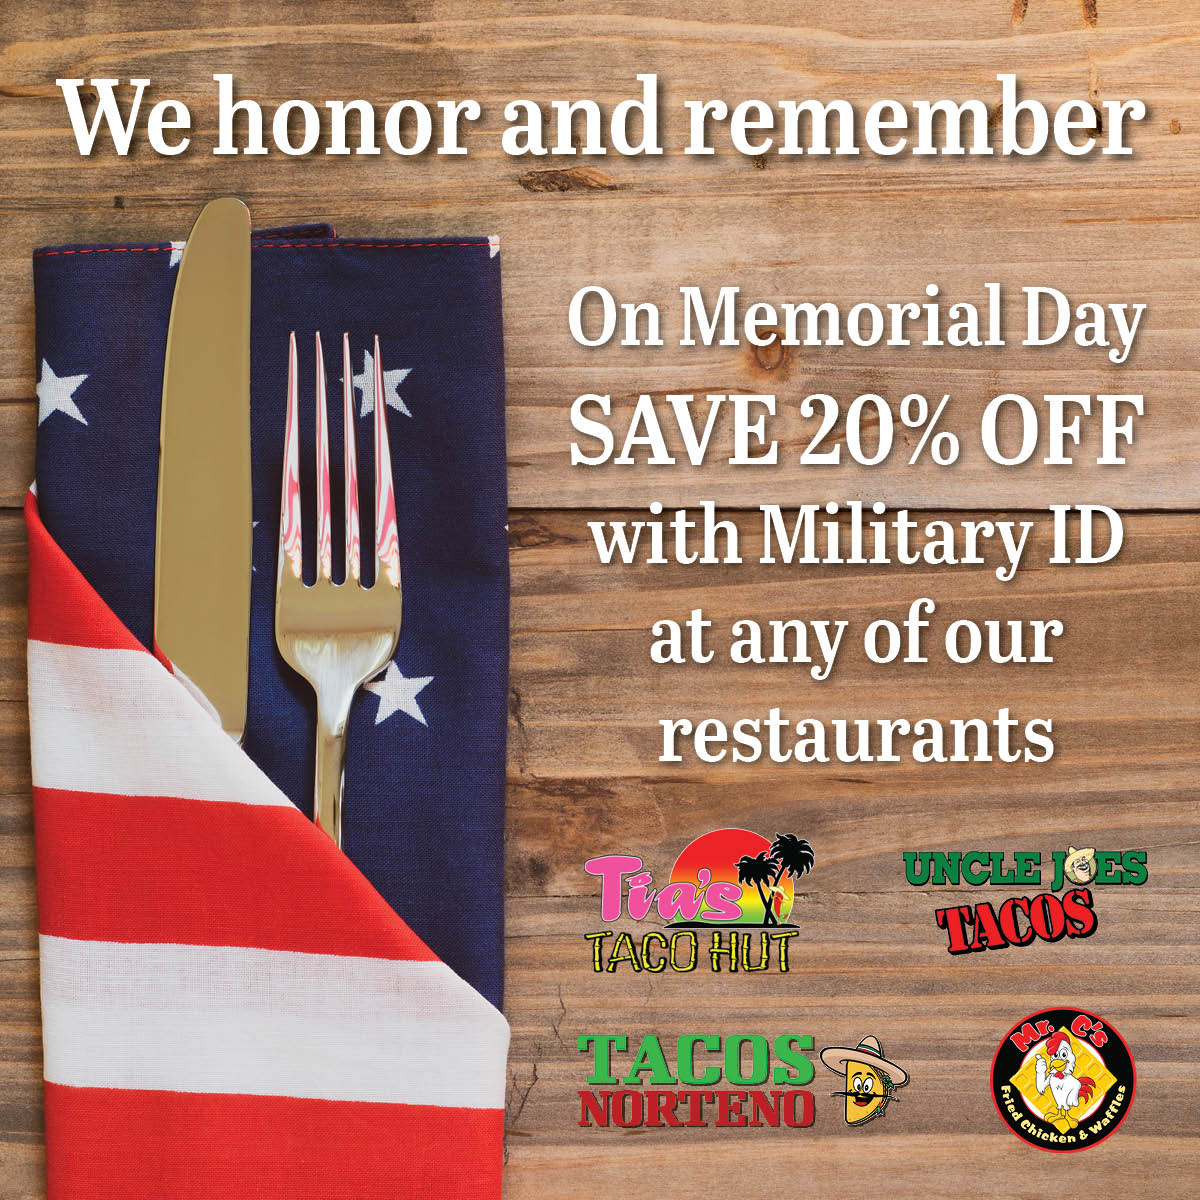 Mr. C’s is proud to serve those who serve. 🇺🇸 In honor of Memorial Day, we’ll be offering 20% OFF tomorrow to those with a military ID.

#mrcsfriedchickenandwaffles #memorialday #comfortfood #safoodie #safood #satxfood #sanantoniofood #safoodpics #eatlocalsa #sanantonioeats